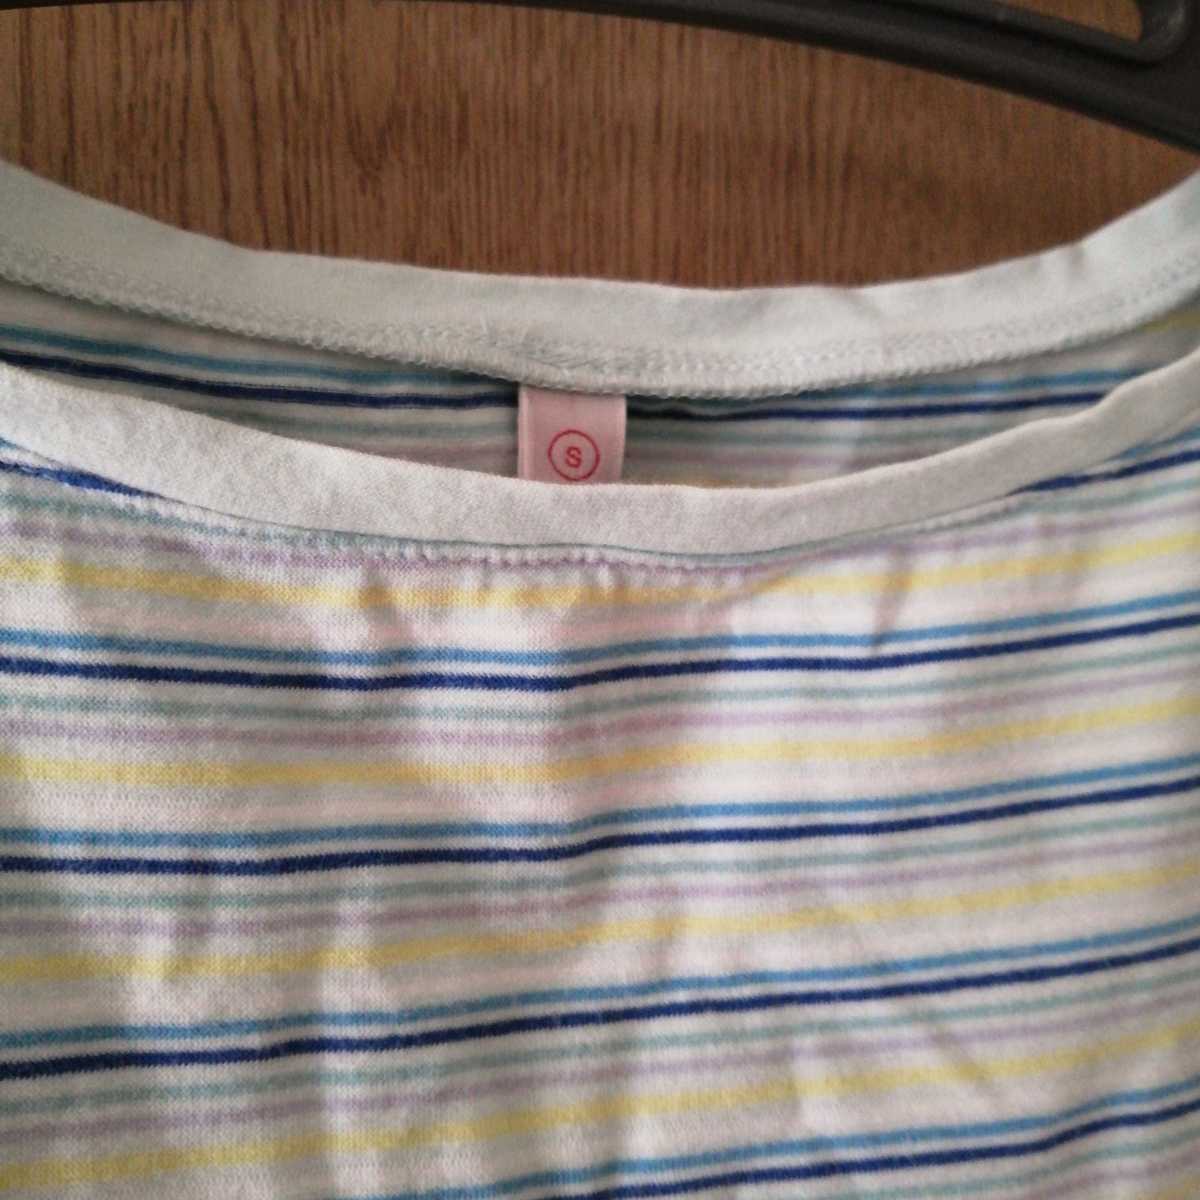  Uniqlo S size tank top cut and sewn no sleeve T-shirt border 